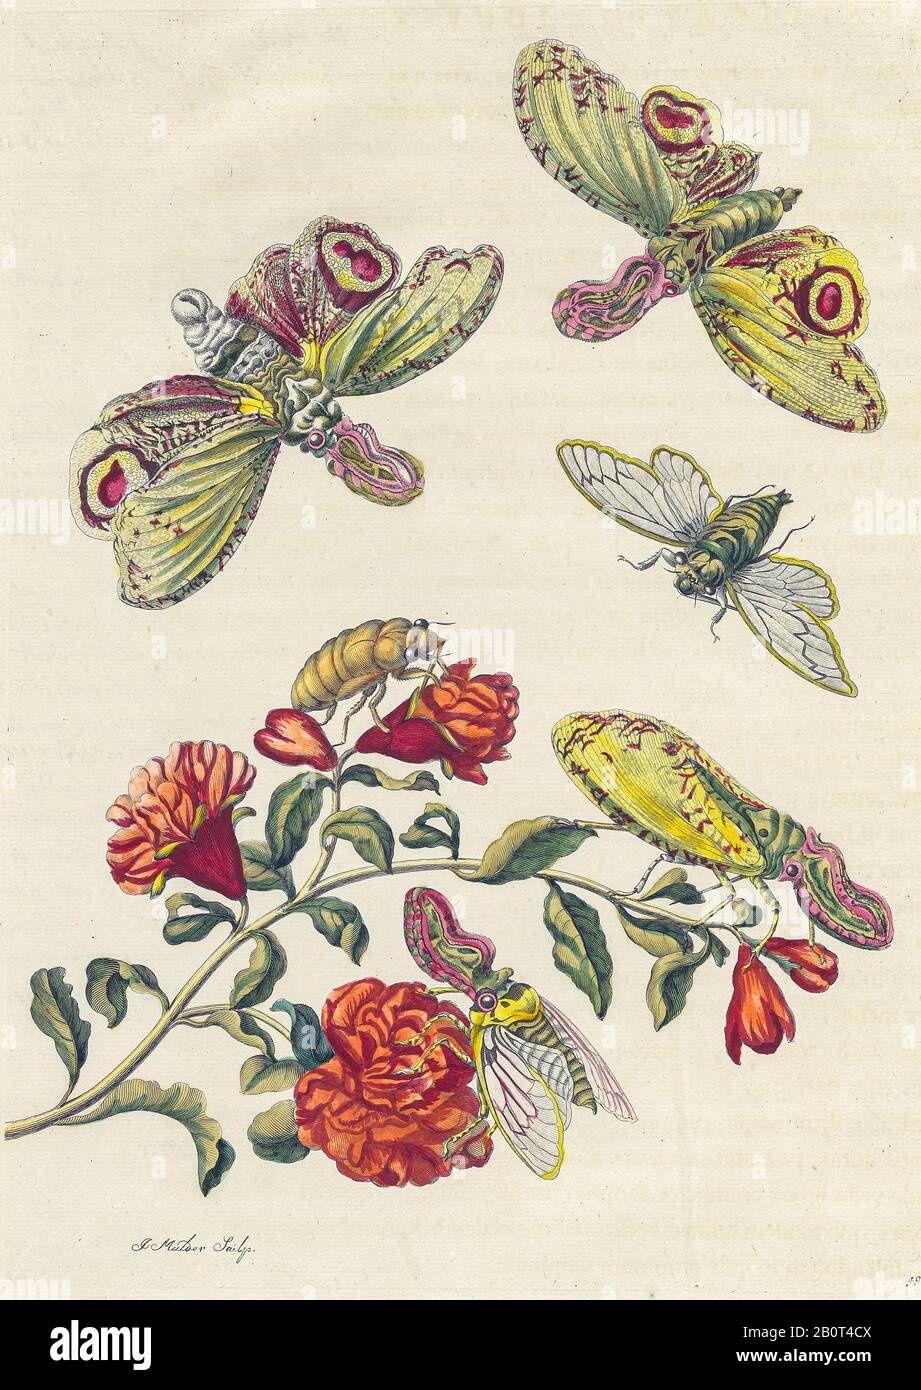 Plant and butterfly from Metamorphosis insectorum Surinamensium (Surinam insects) a hand coloured 18th century Book by Maria Sibylla Merian published Stock Photo